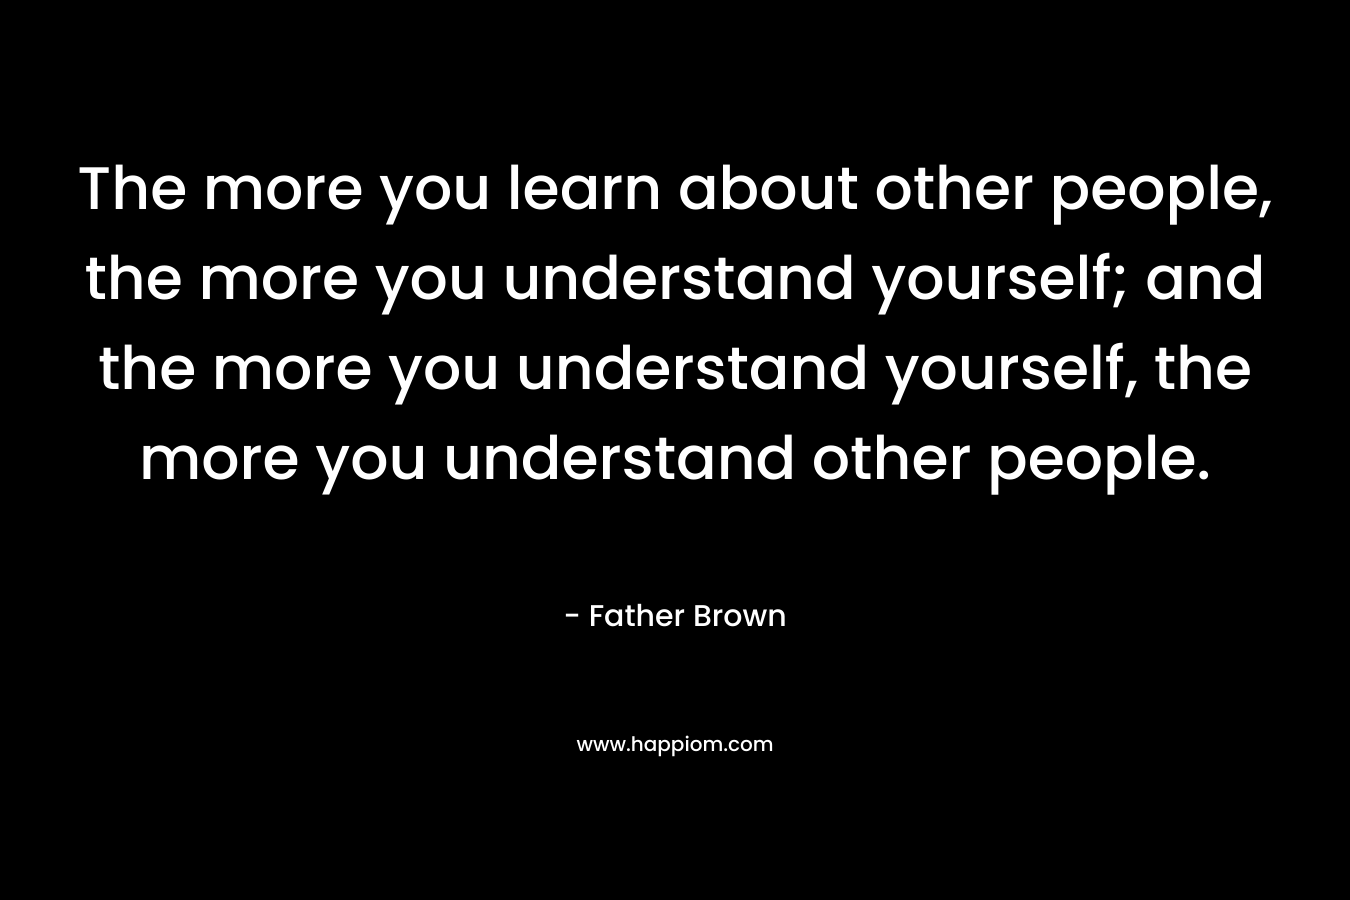 The more you learn about other people, the more you understand yourself; and the more you understand yourself, the more you understand other people.